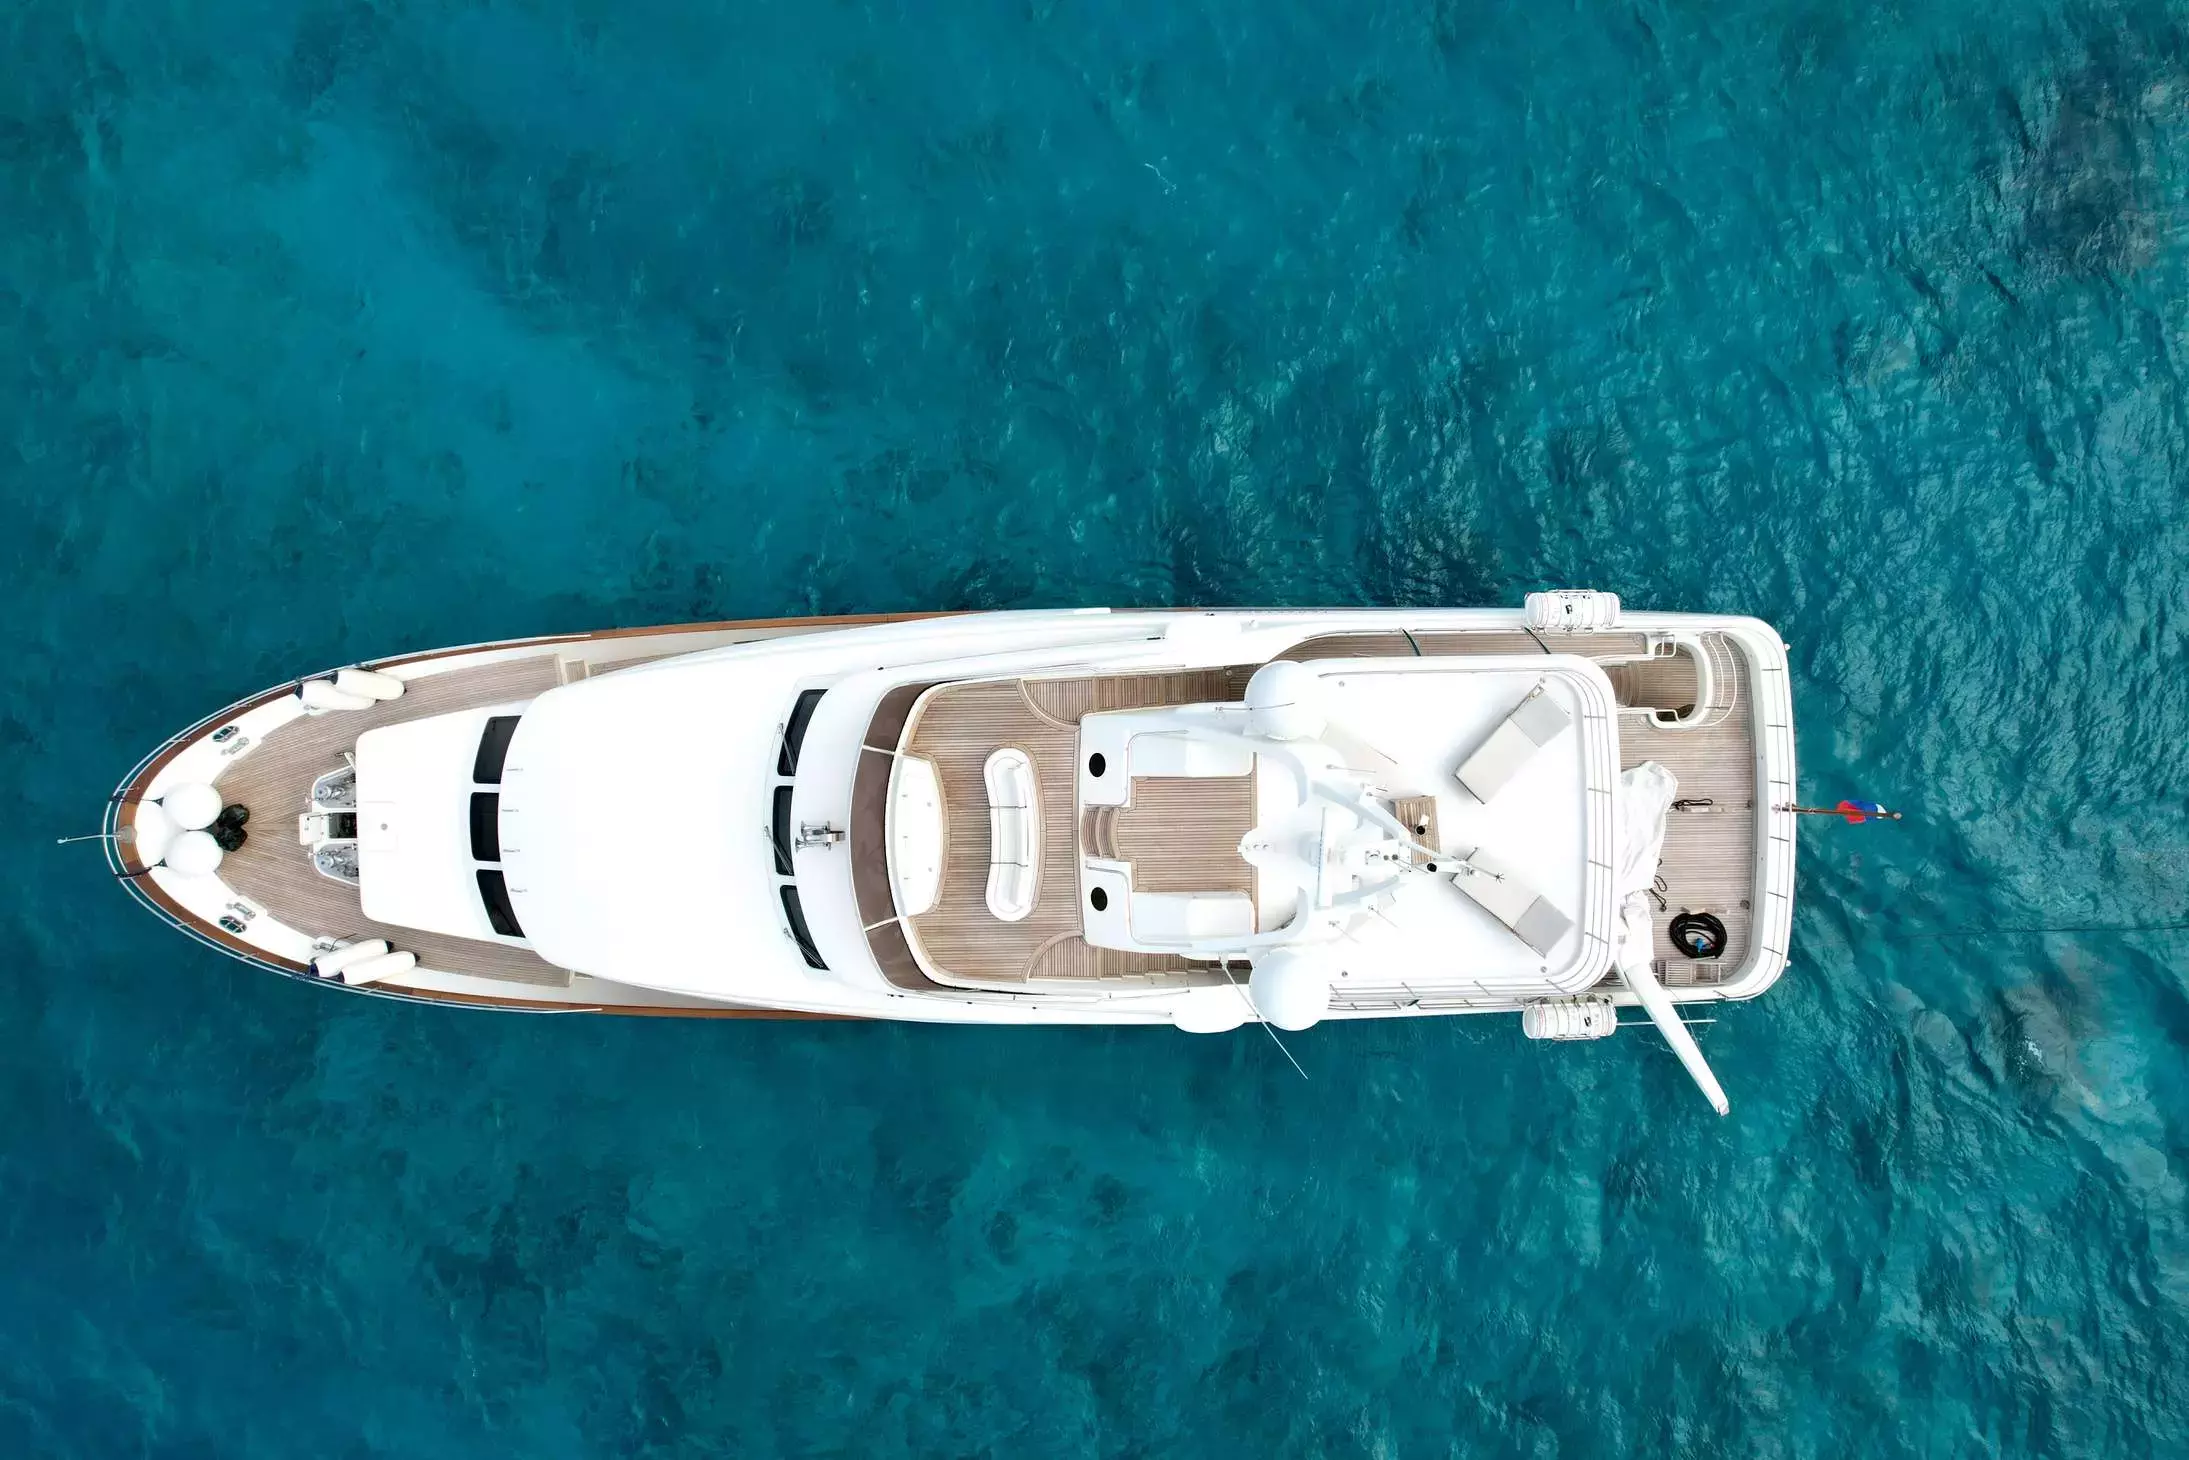 Galaktika by Benetti - Top rates for a Charter of a private Motor Yacht in Seychelles